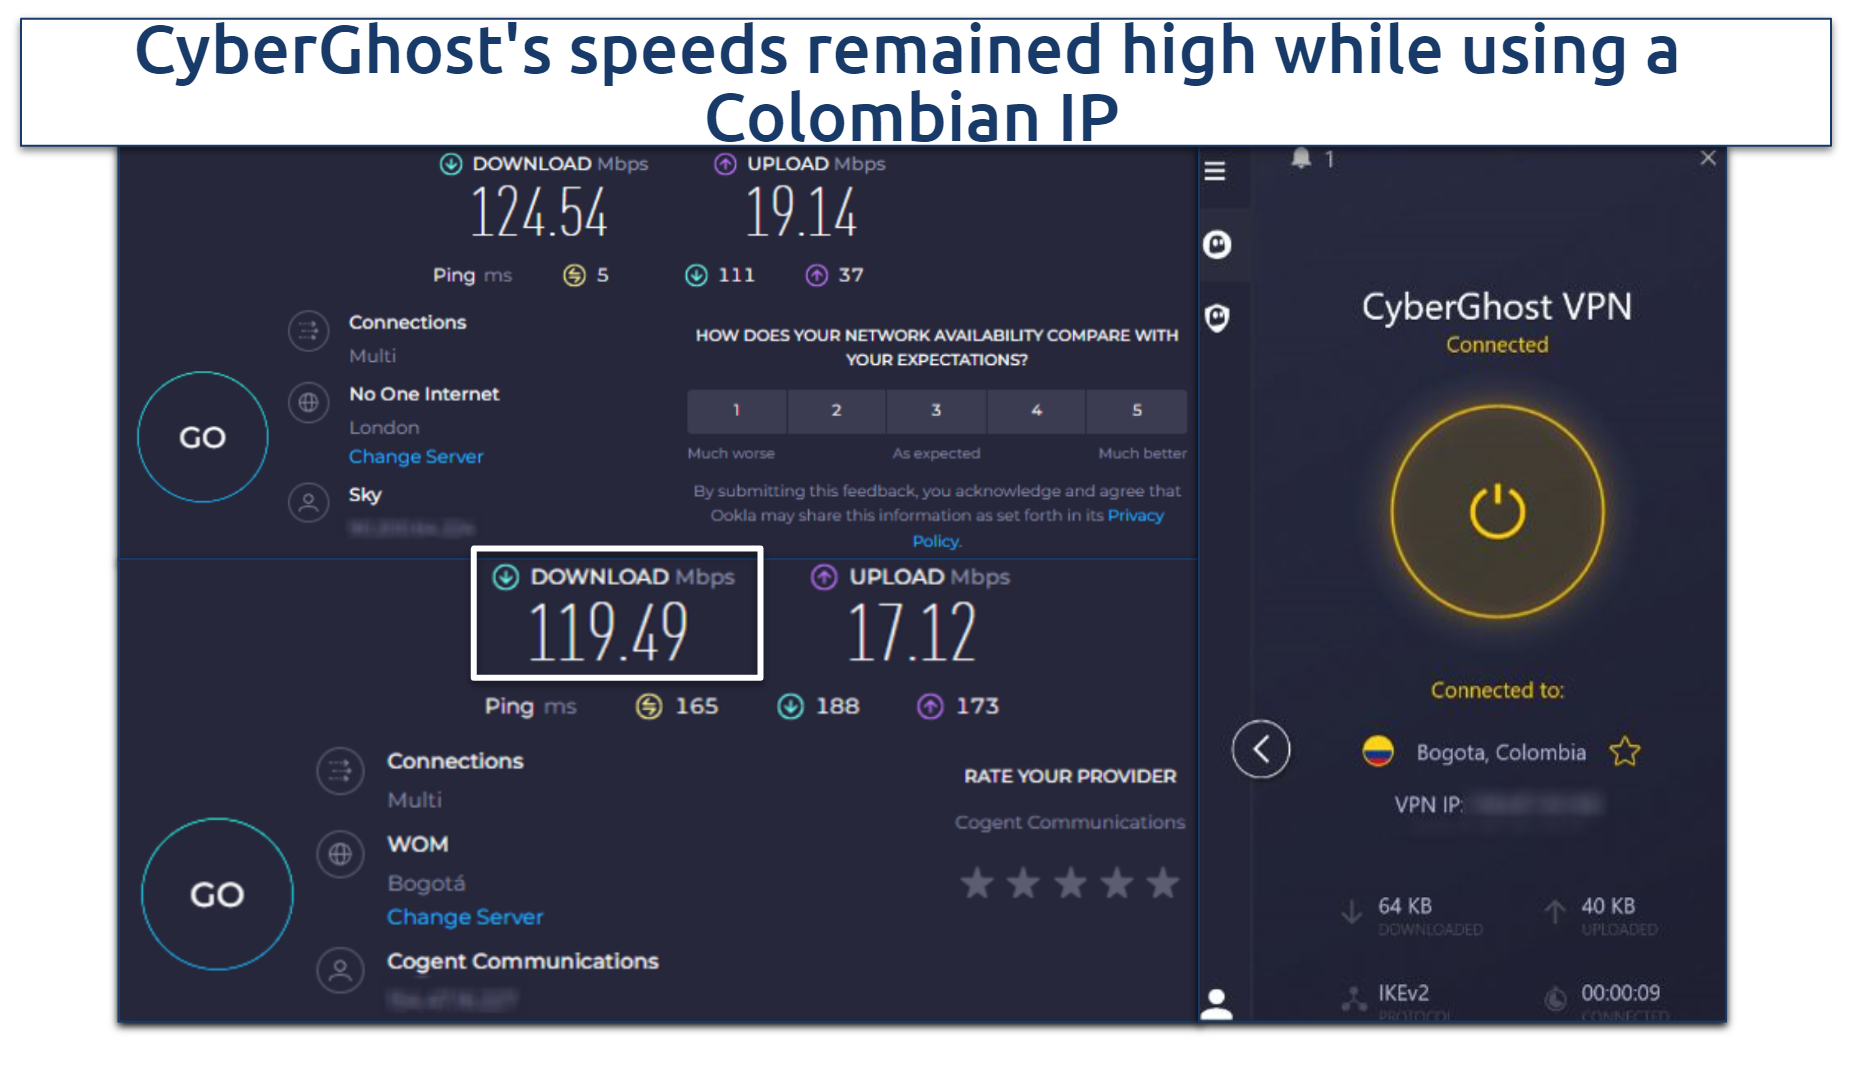 A screenshot showing the average speed difference while using CyberGhost's Colombian servers